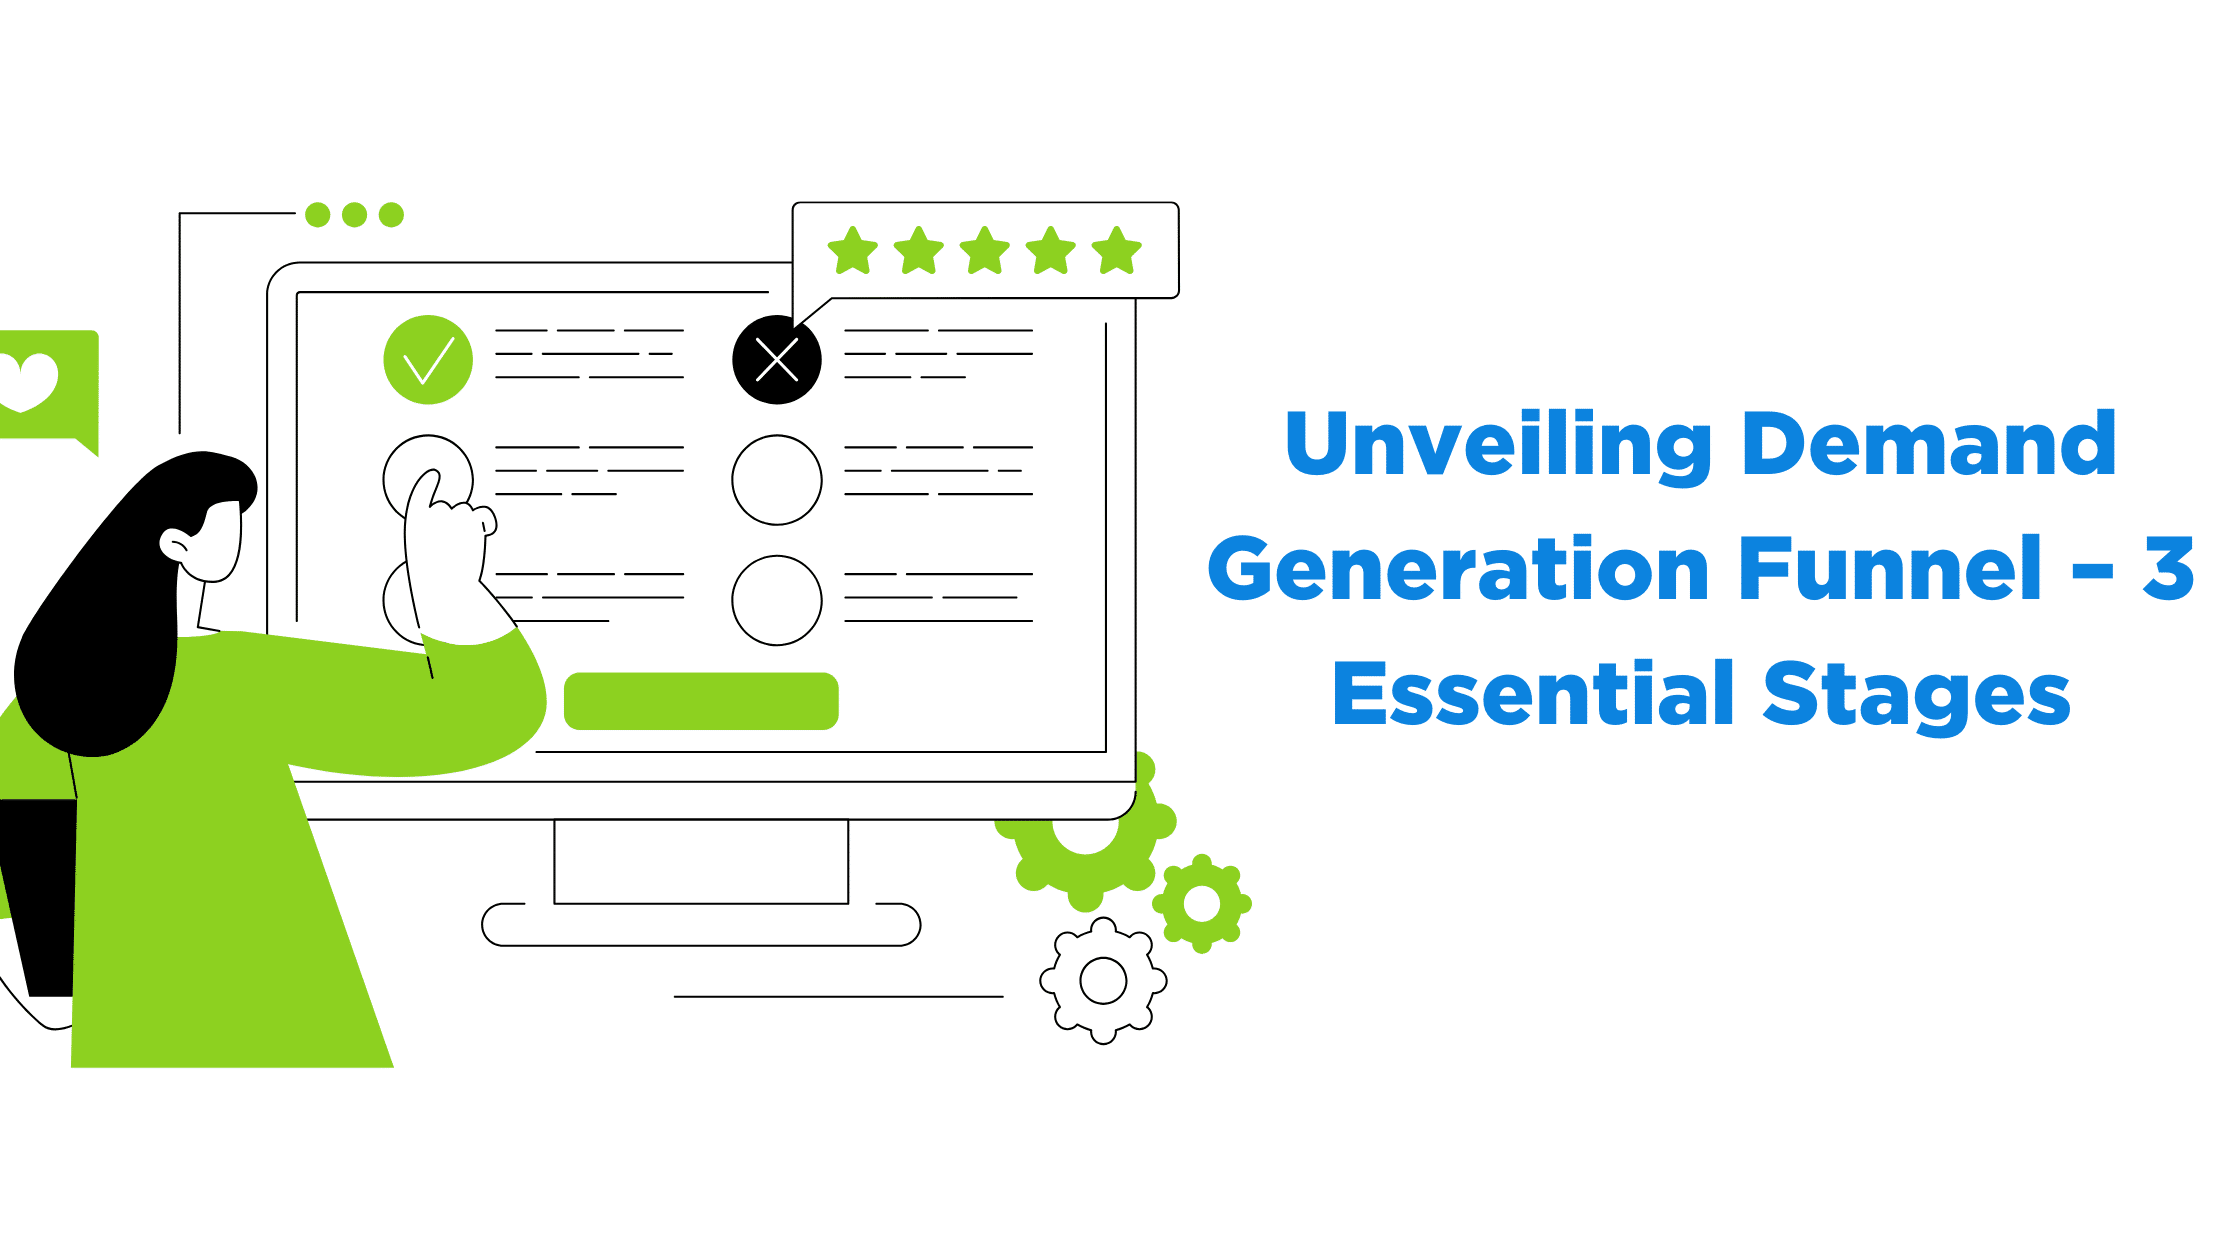 Unveiling Demand Generation Funnel – 3 Essential Stages